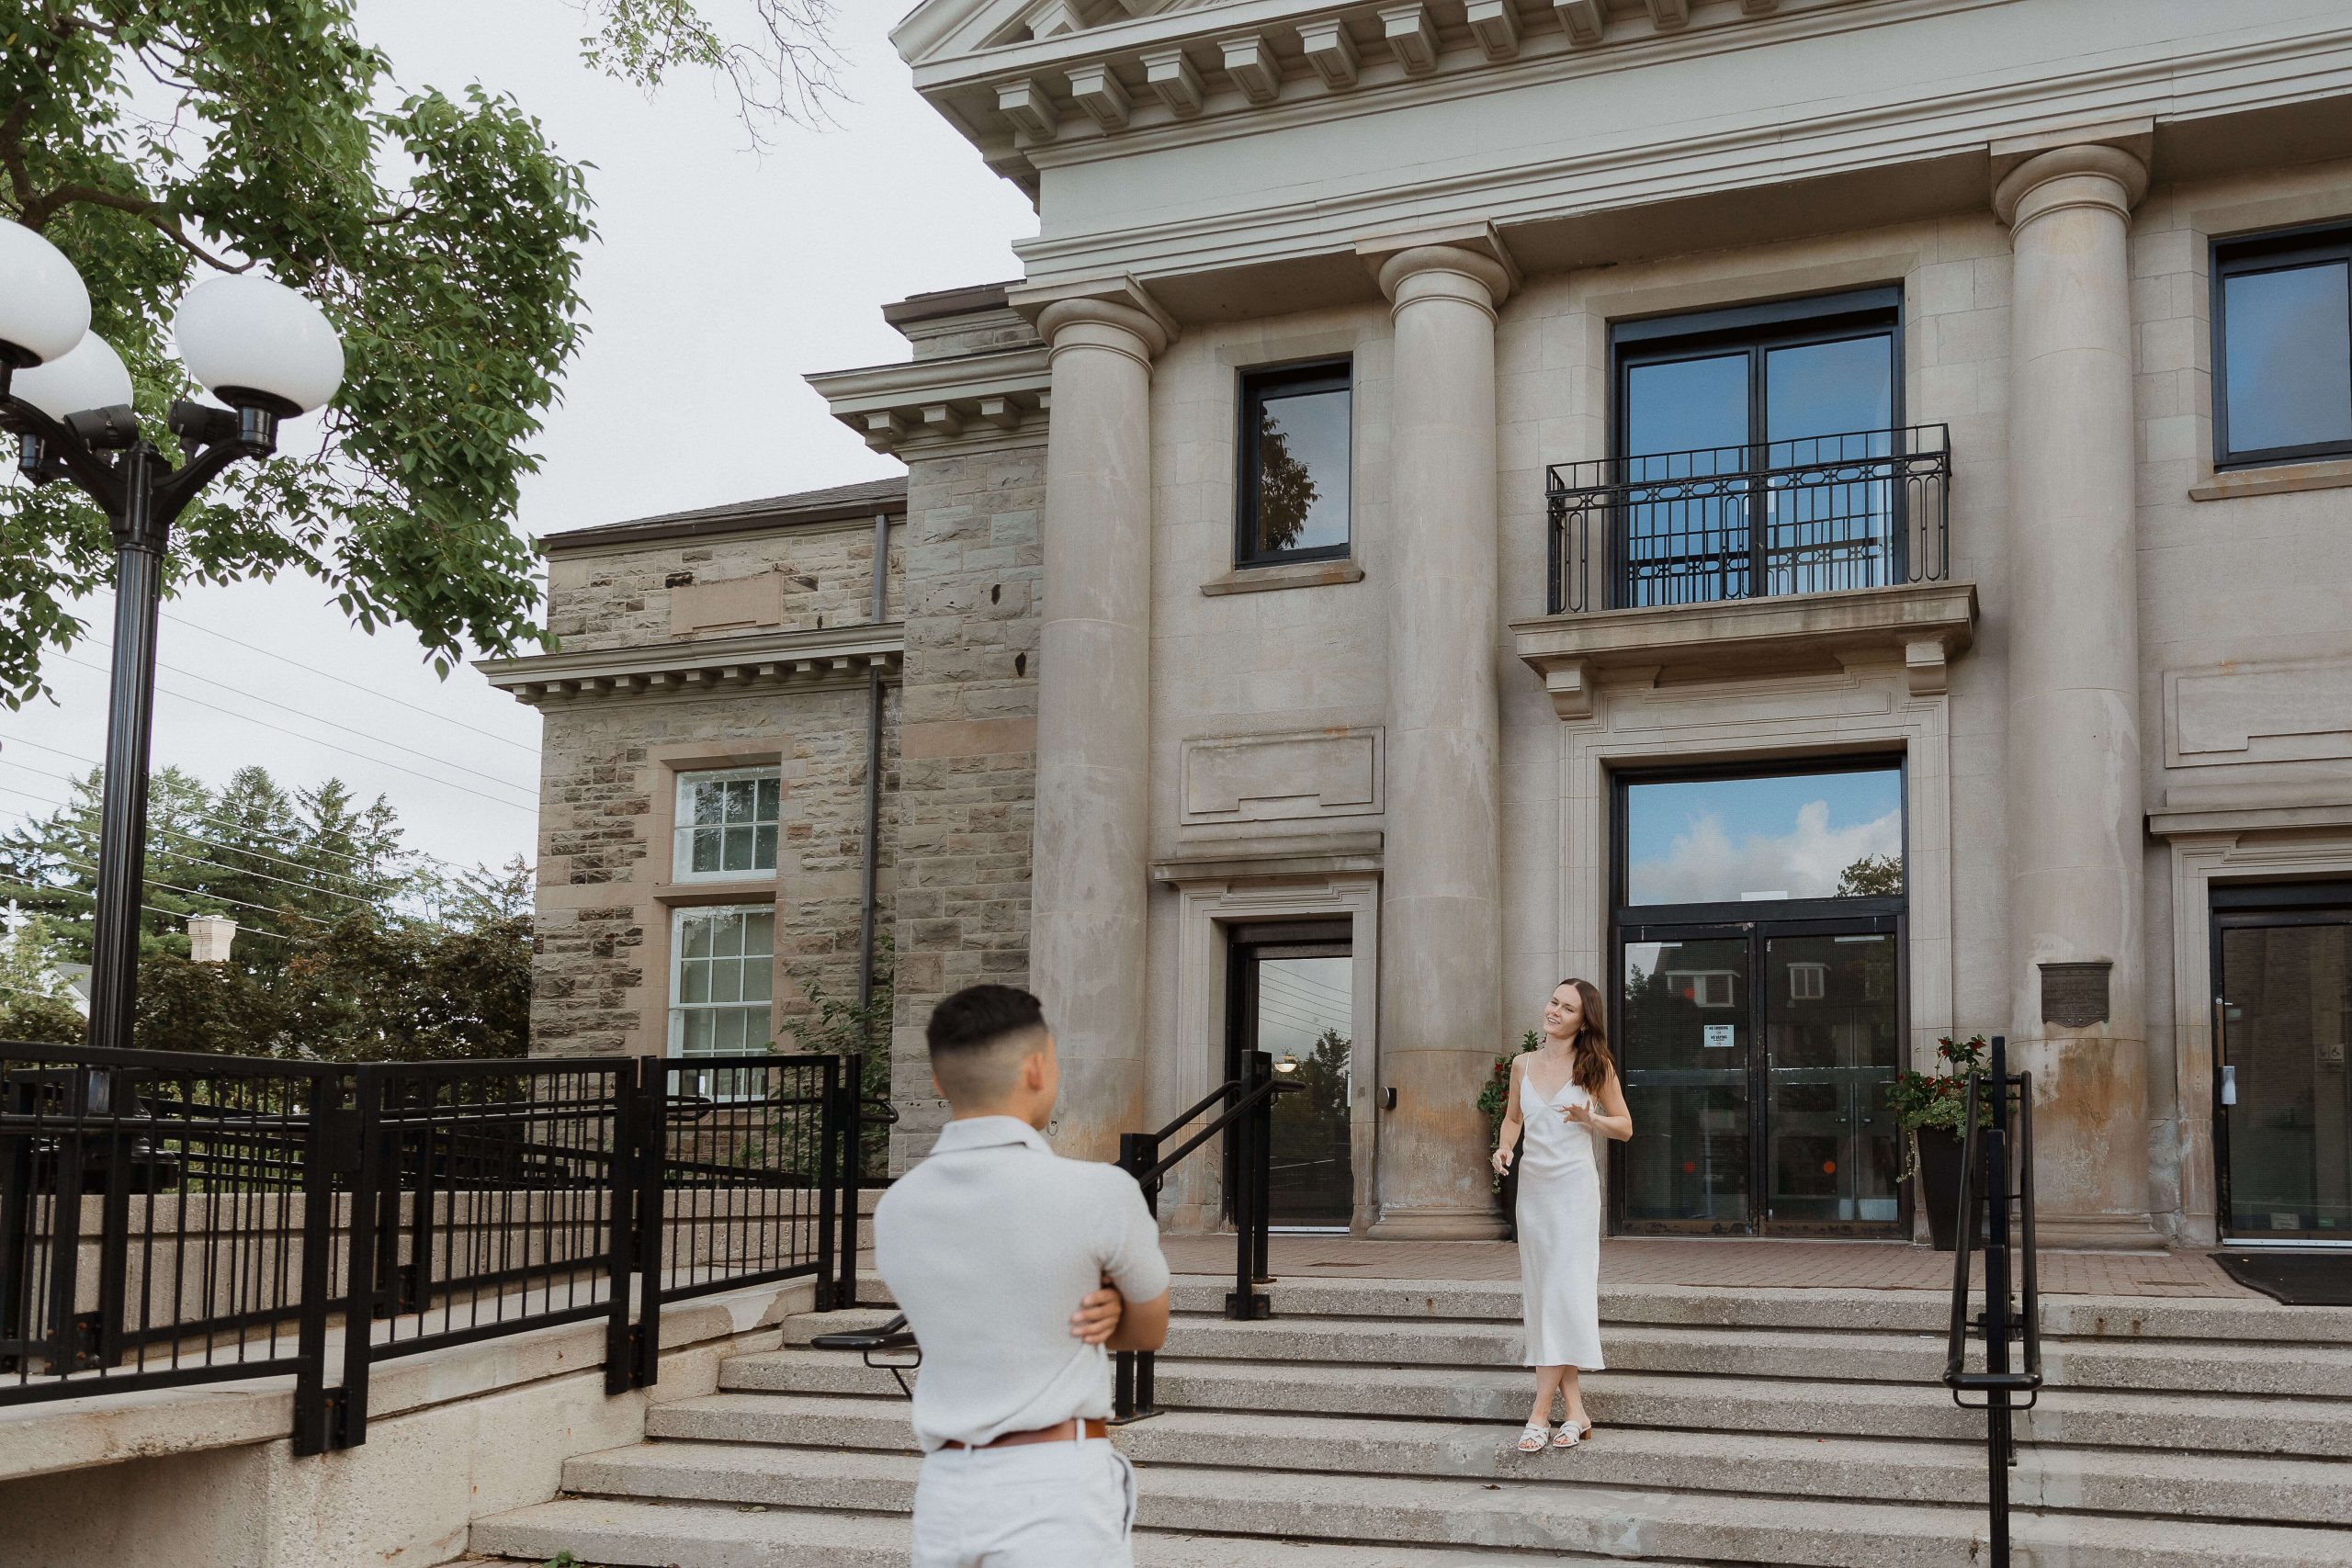 Engagement photos at Guelph University outside the old buildings | Sonia V Photography standing on stairs